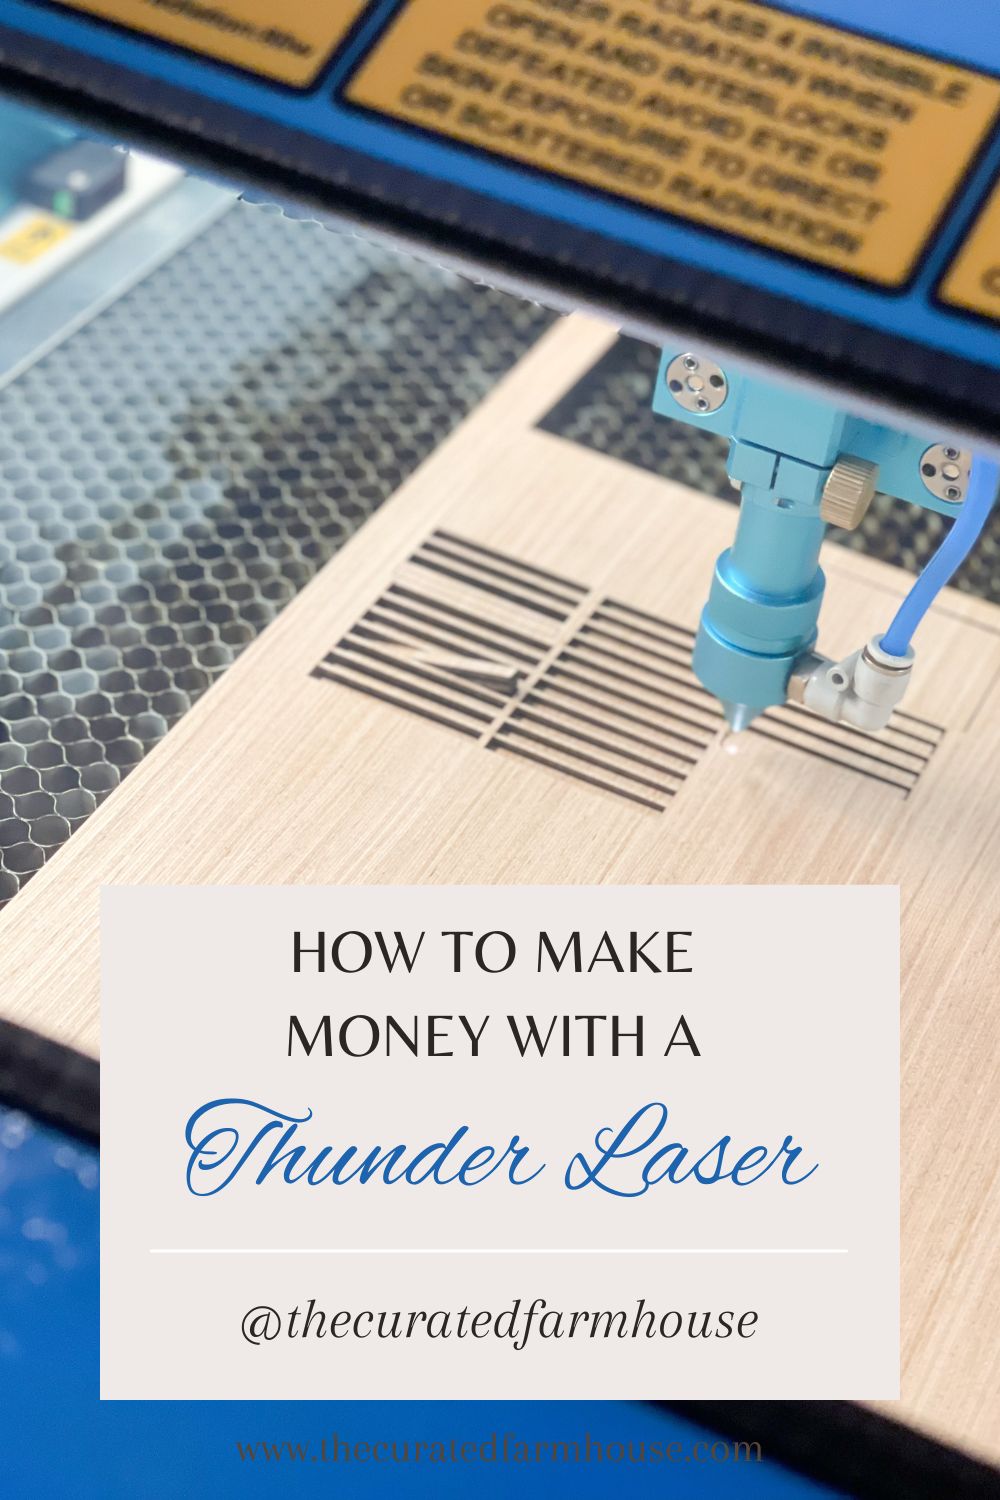 How to Make Money With a Thunder Laser